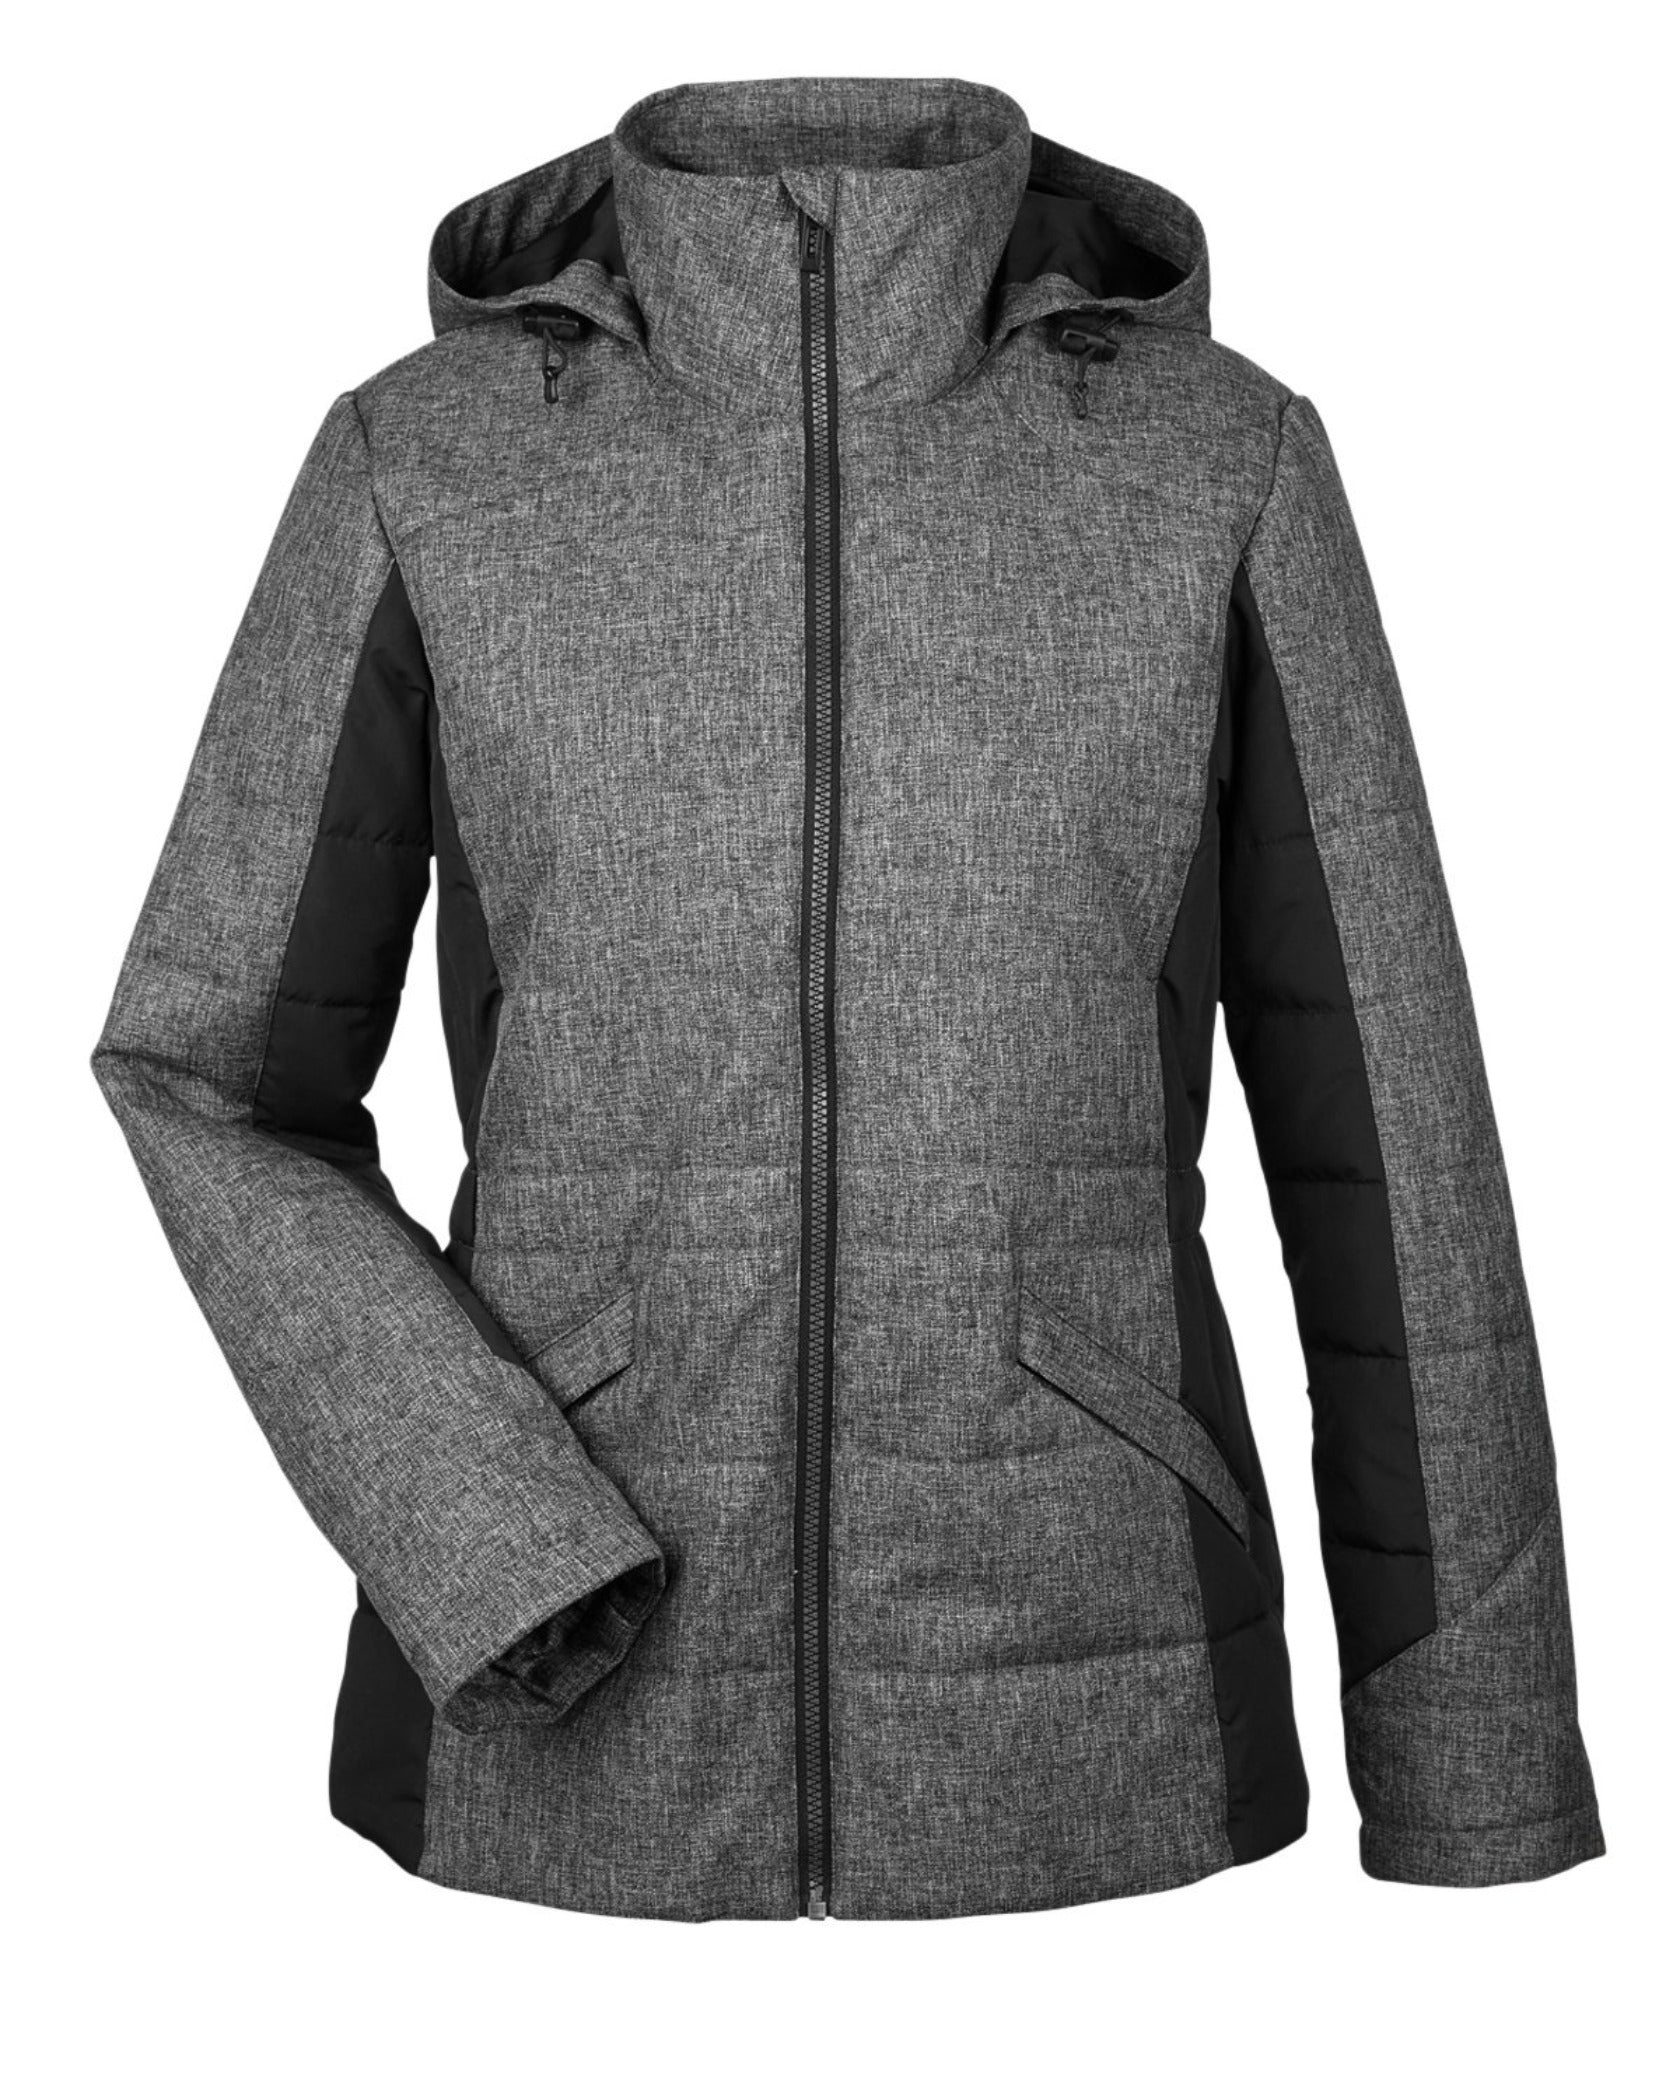 Ladies Insulated Jacket with Hood. Front 